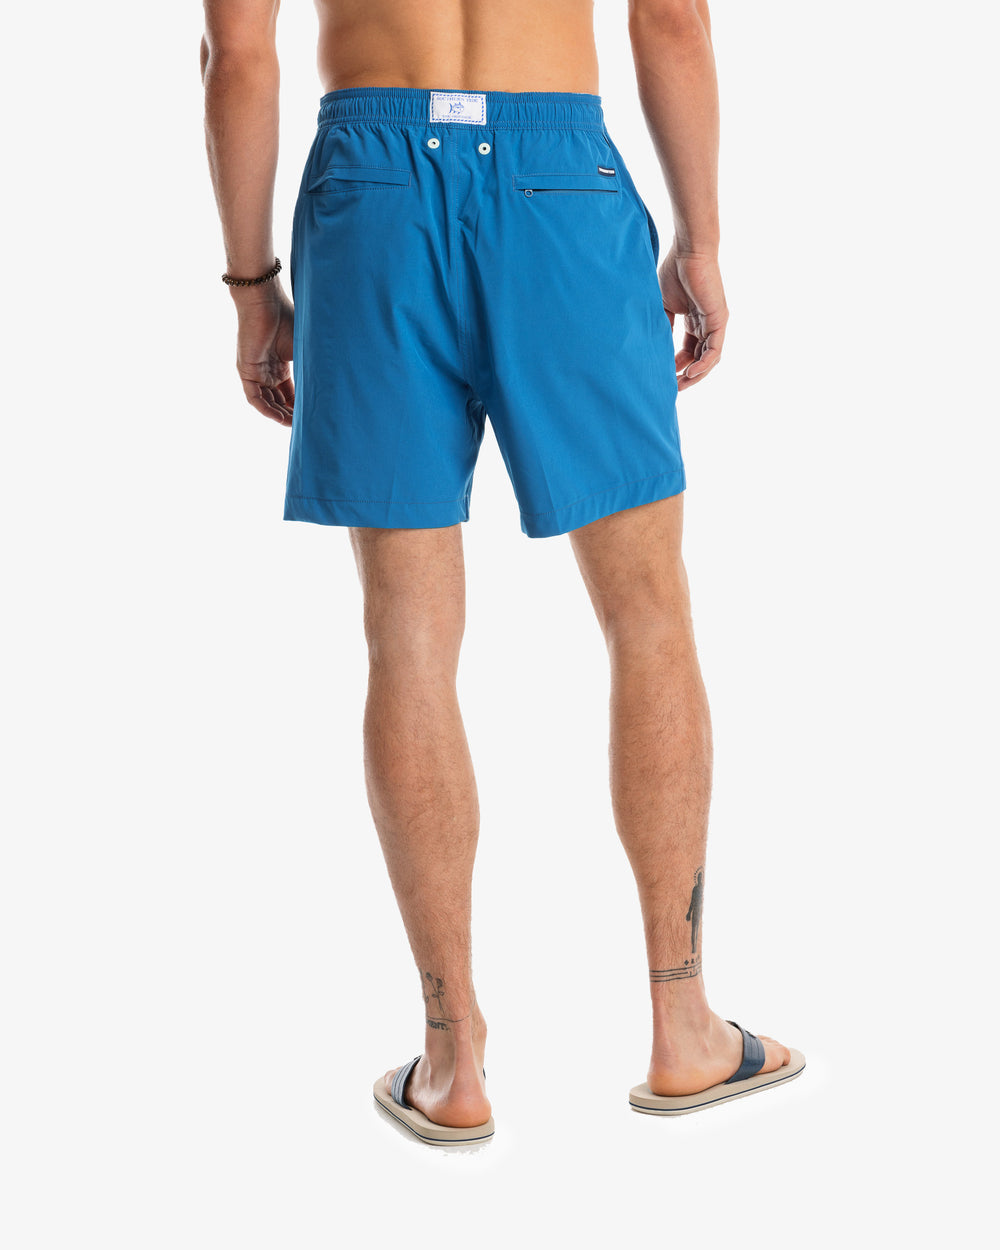 The model back view of the Men's Solid Swim Trunk by Southern Tide - Blue Sapphire